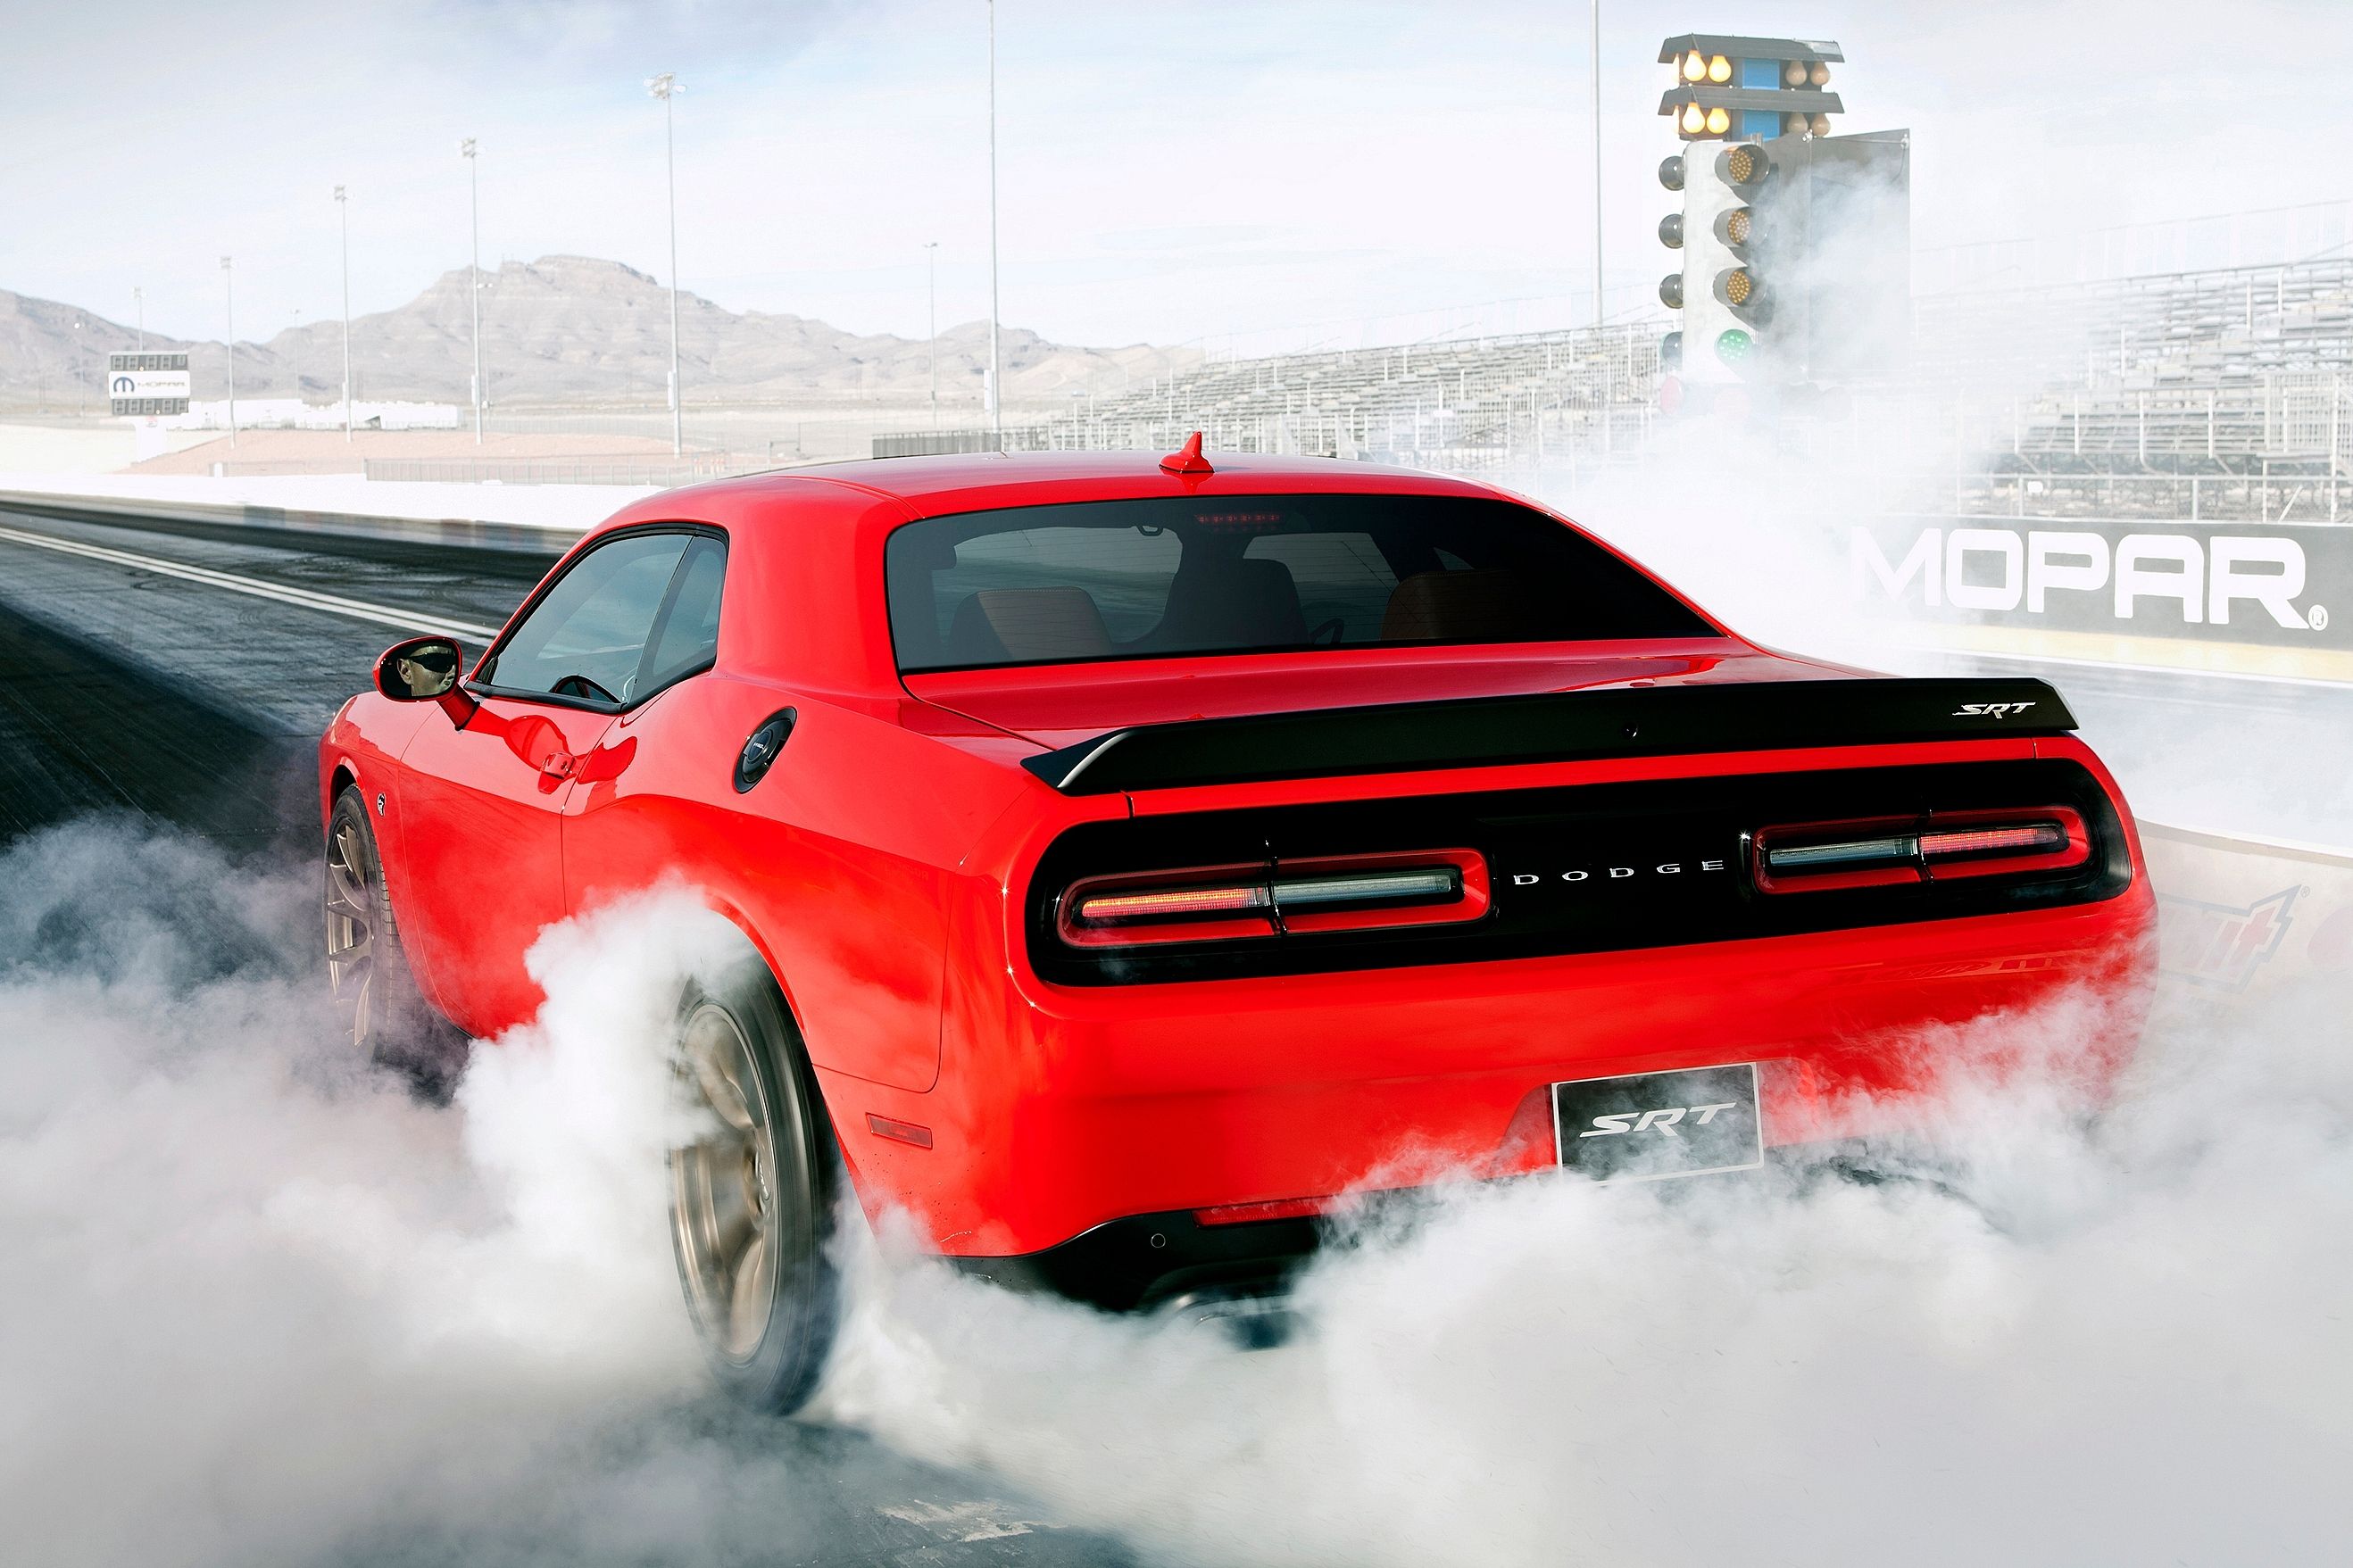 Coffee & Cars Permanently Bans Modern American Muscle Cars From Future Events